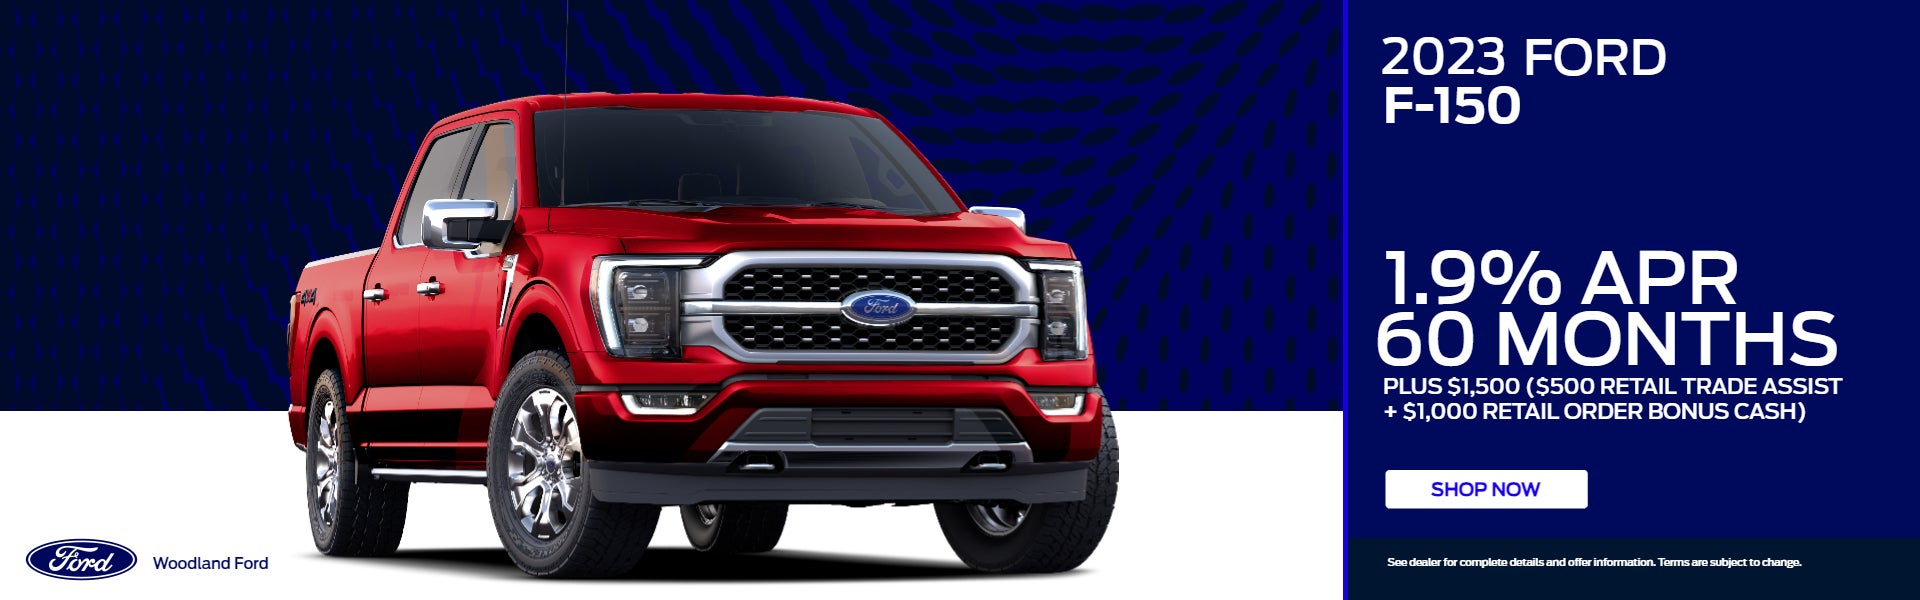 2023 Ford F-150, Red